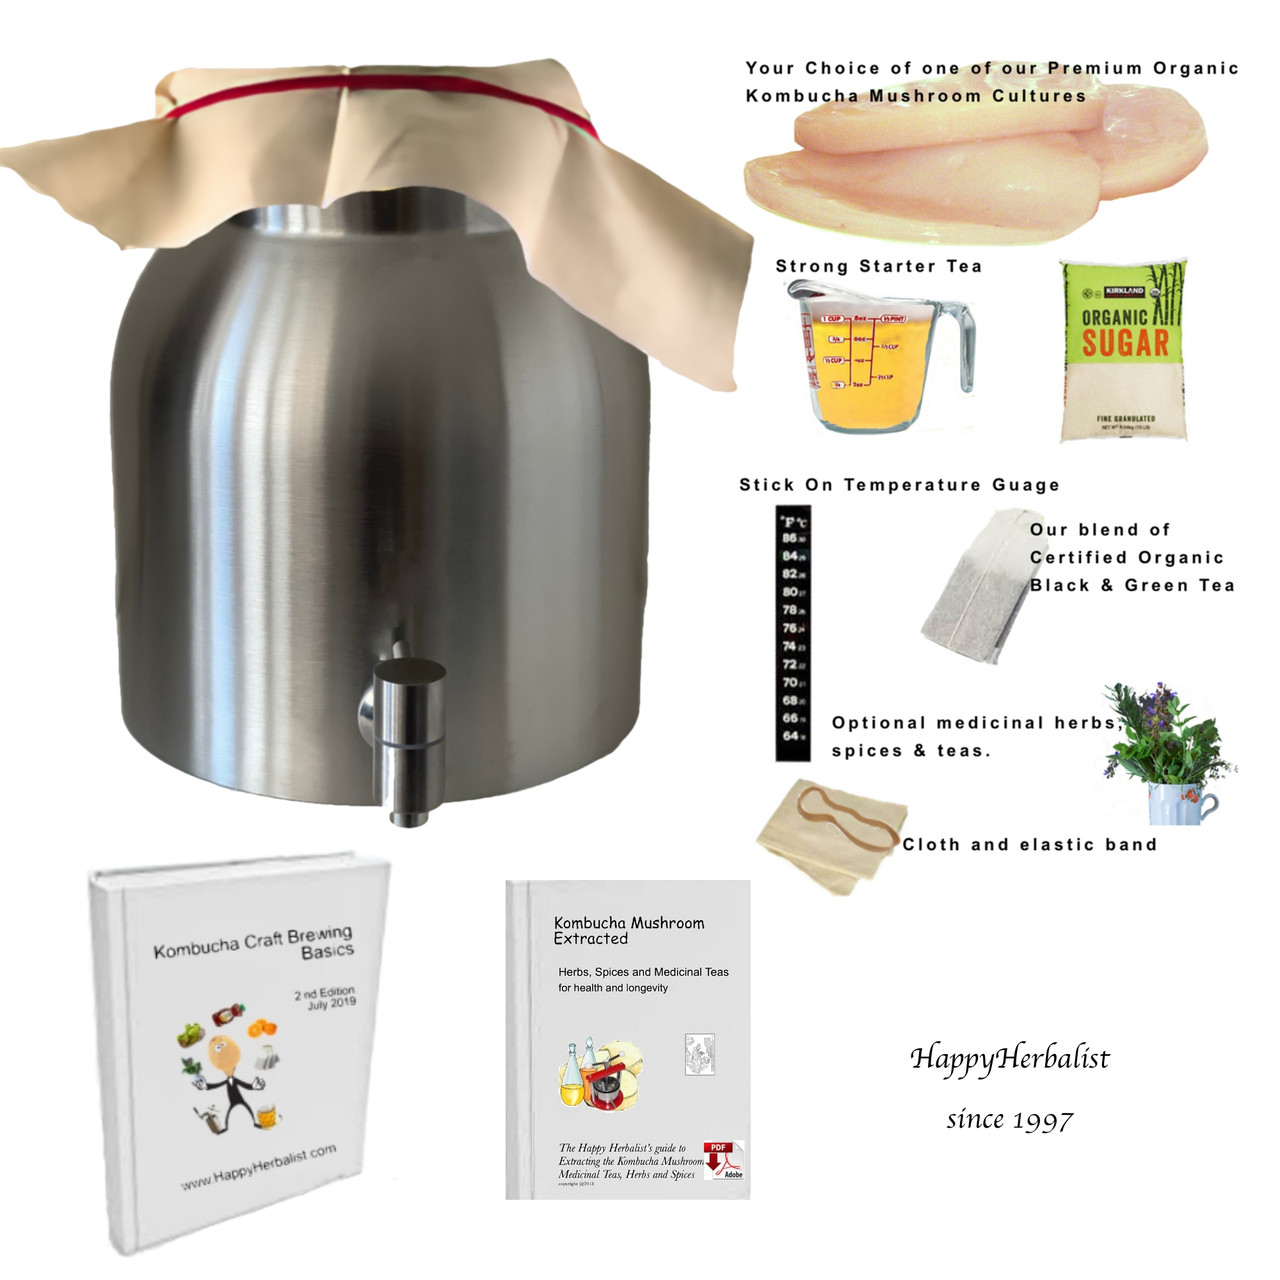 https://cdn11.bigcommerce.com/s-apc69m1e/images/stencil/1280x1280/products/562/5546/Kombucha_Stainless_Steel_2_Gallon_Fermenter_Complete_SCOBY_STarter_CUlture_Just_Add_Water__01025.1652217986.jpg?c=2